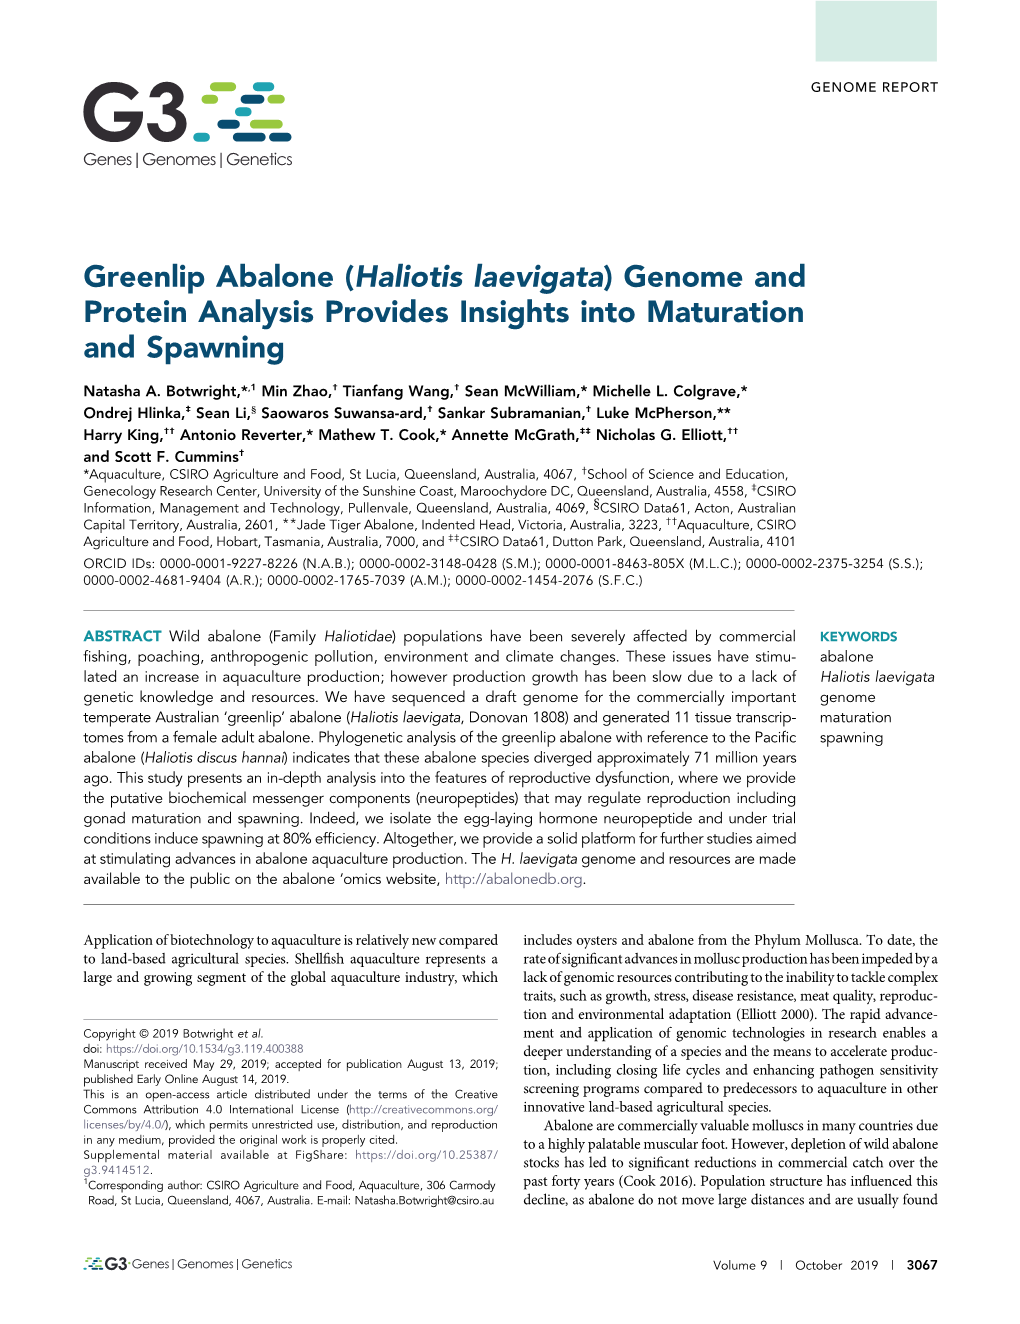 Greenlip Abalone (Haliotis Laevigata) Genome and Protein Analysis Provides Insights Into Maturation and Spawning